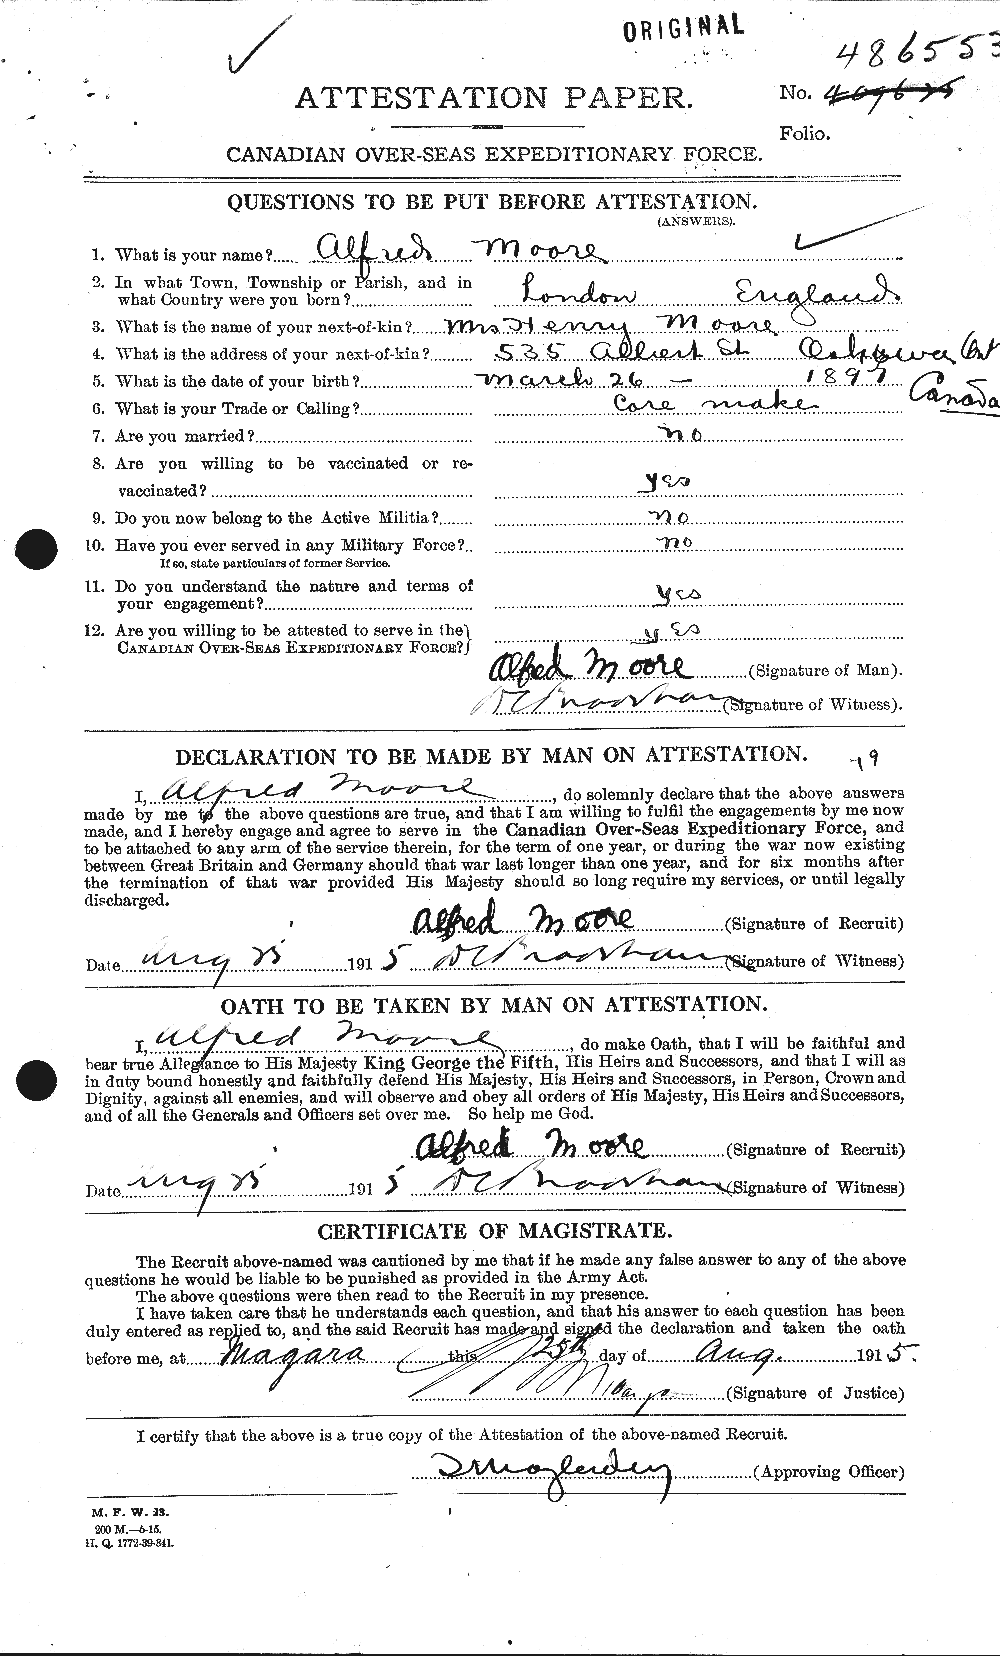 Personnel Records of the First World War - CEF 506374a